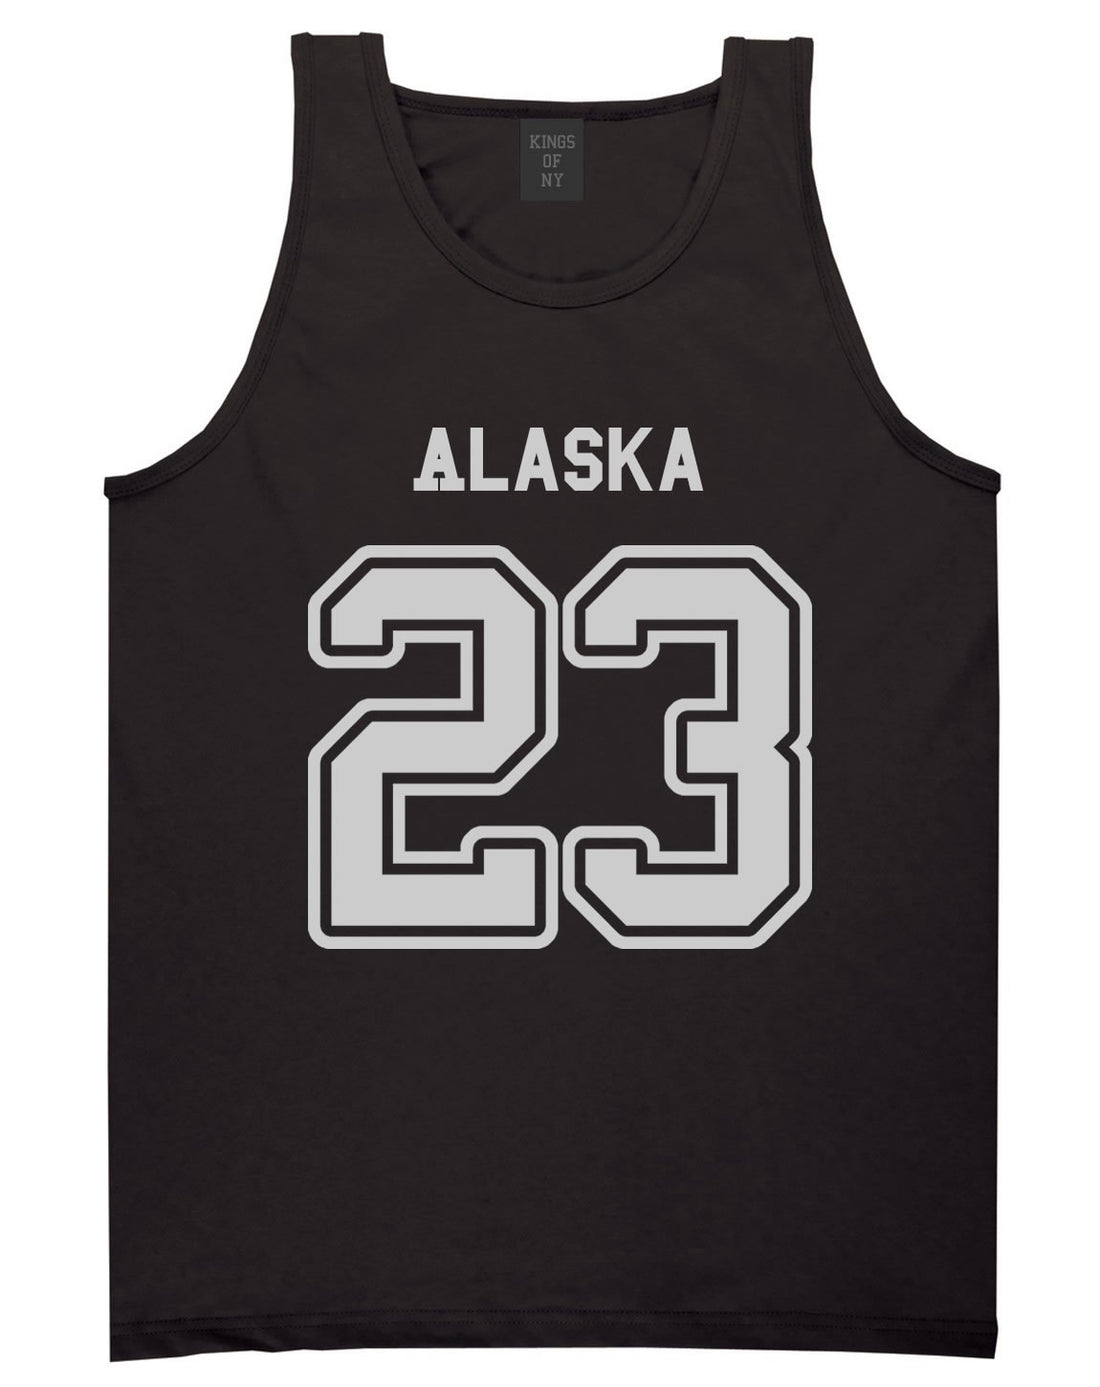 Sport Style Alaska 23 Team State Jersey Mens Tank Top By Kings Of NY